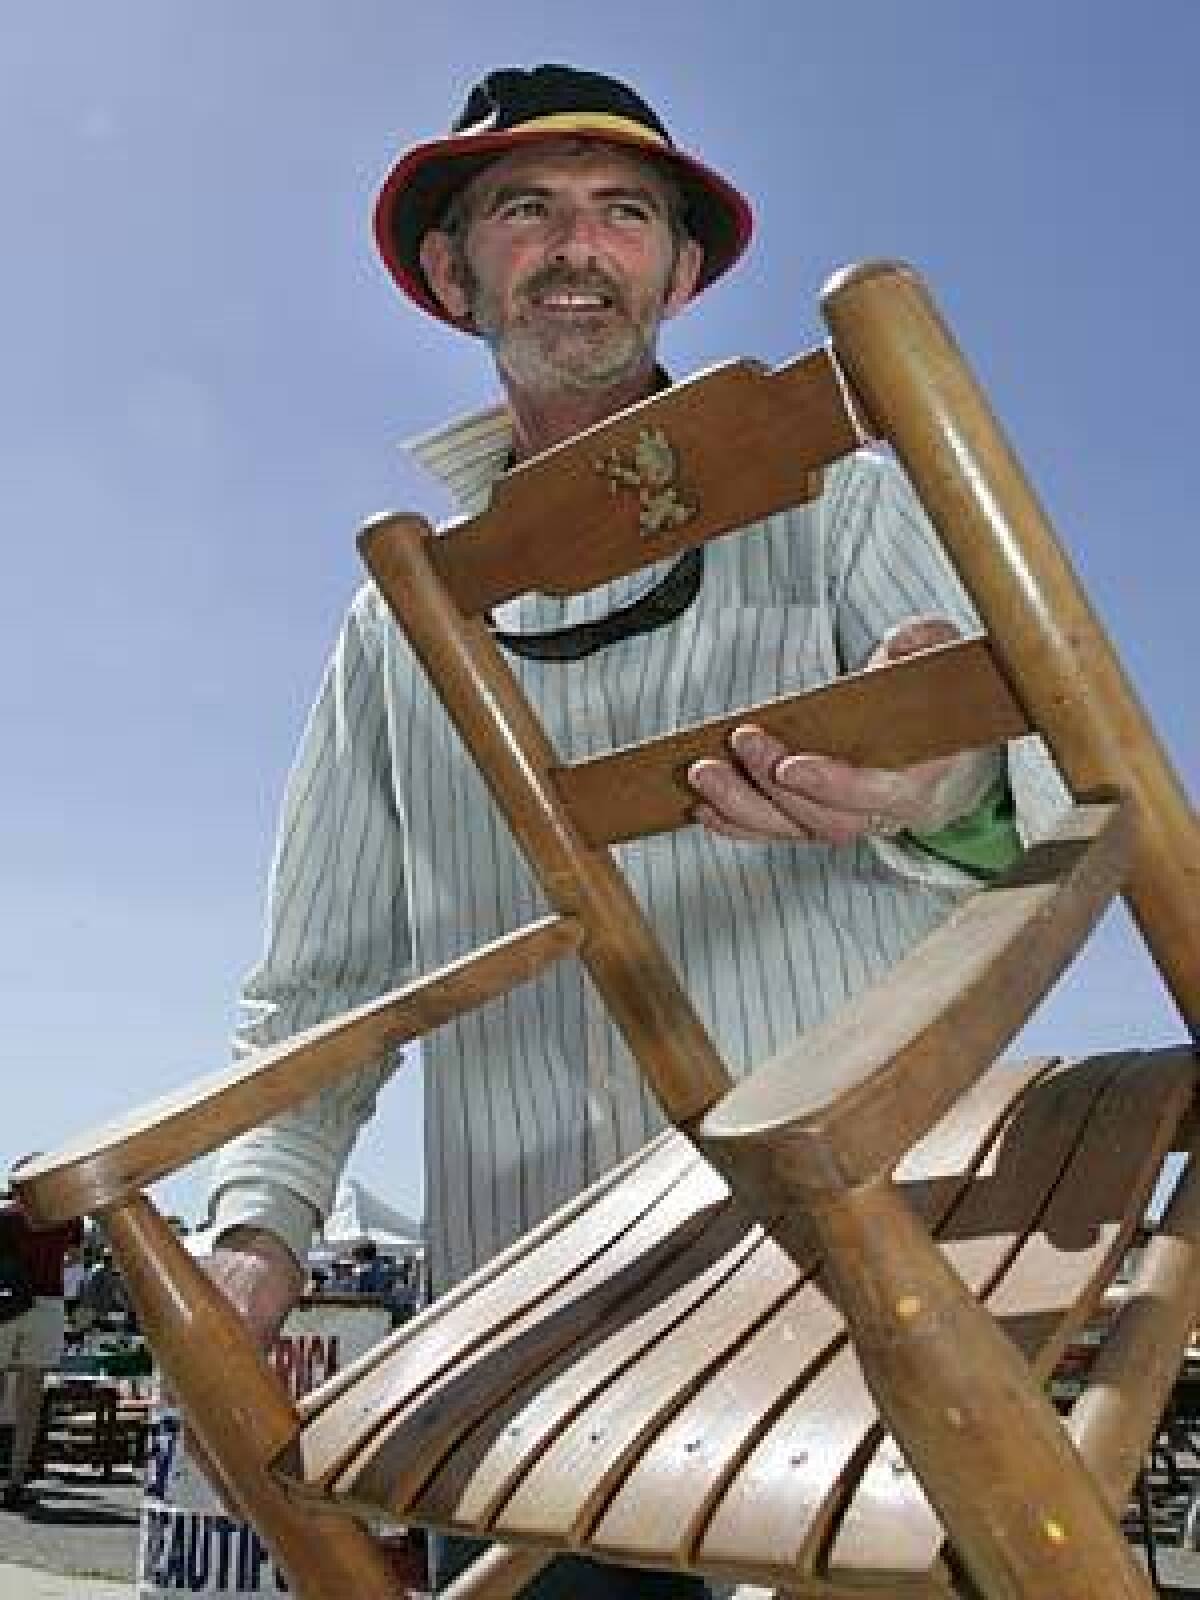 Niall Bourke walks through the Ventura Flea Market checking for quality woodwork and craftsmanship. He pronounces a child's rocker a steal at $35.